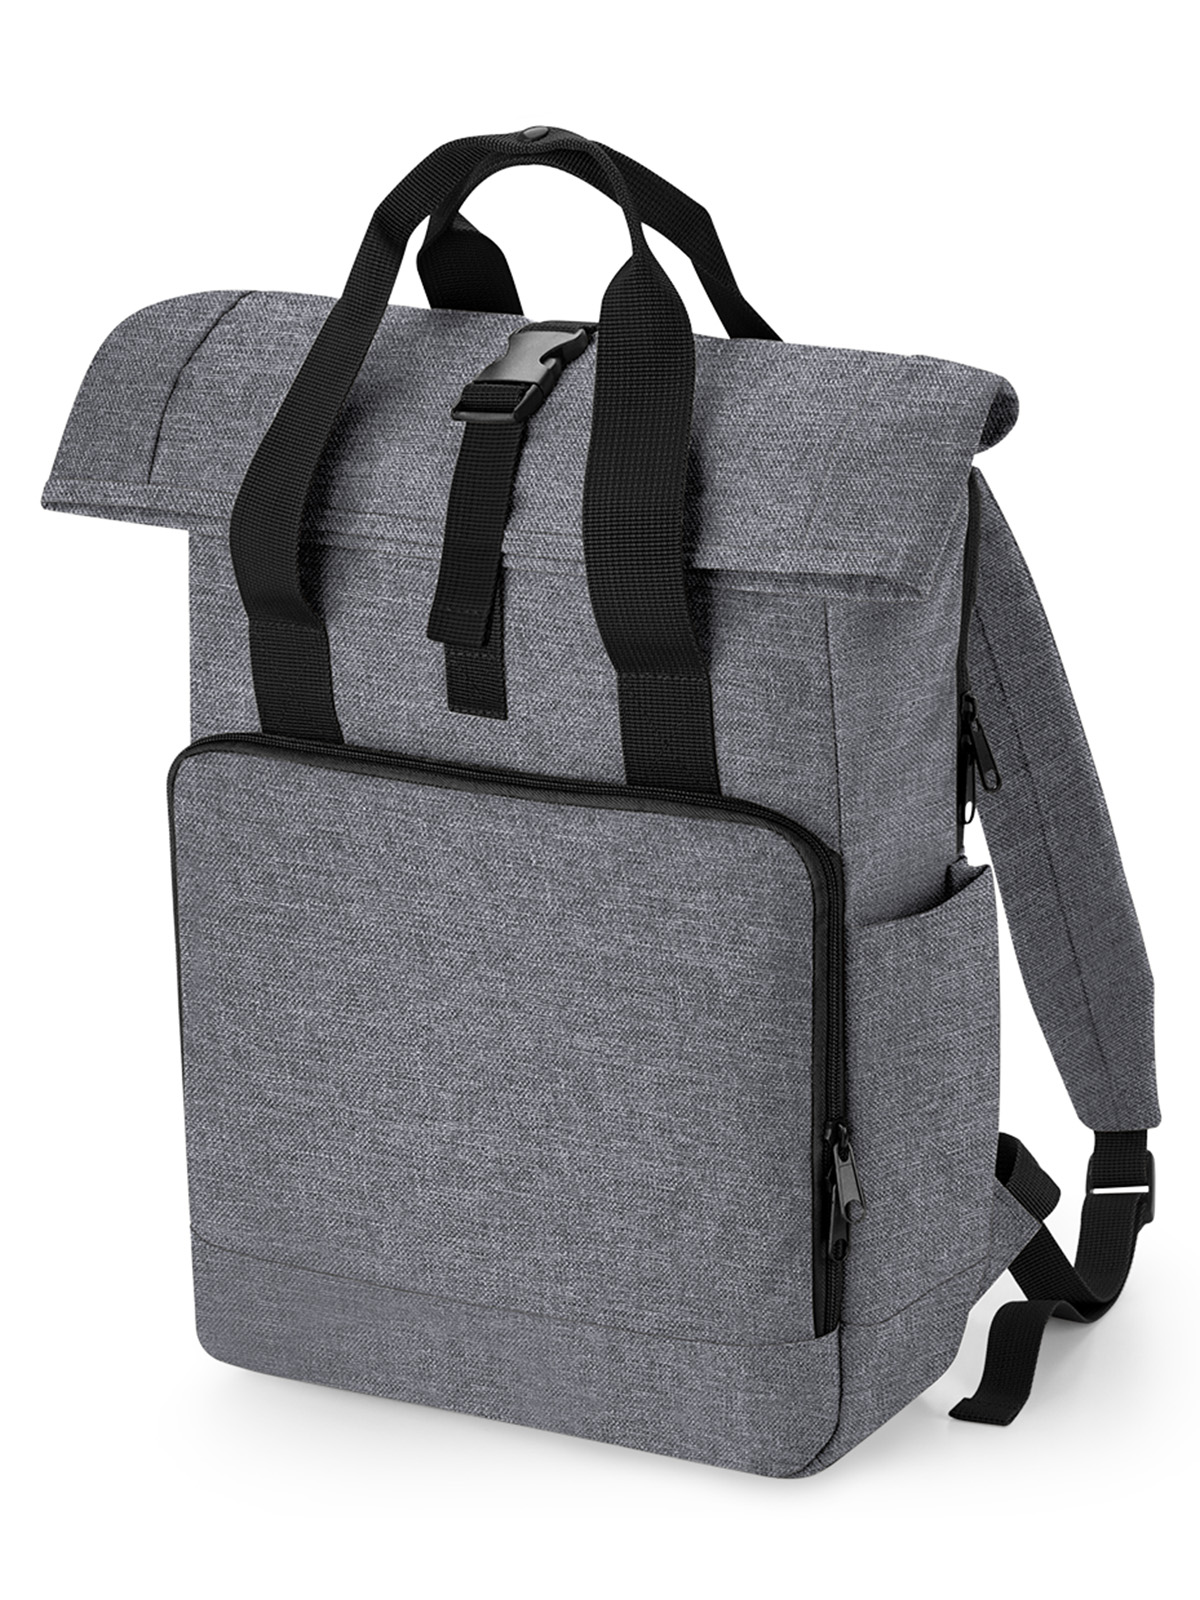 recycled-twin-handle-roll-top-laptop-backpack-grey-marl.webp